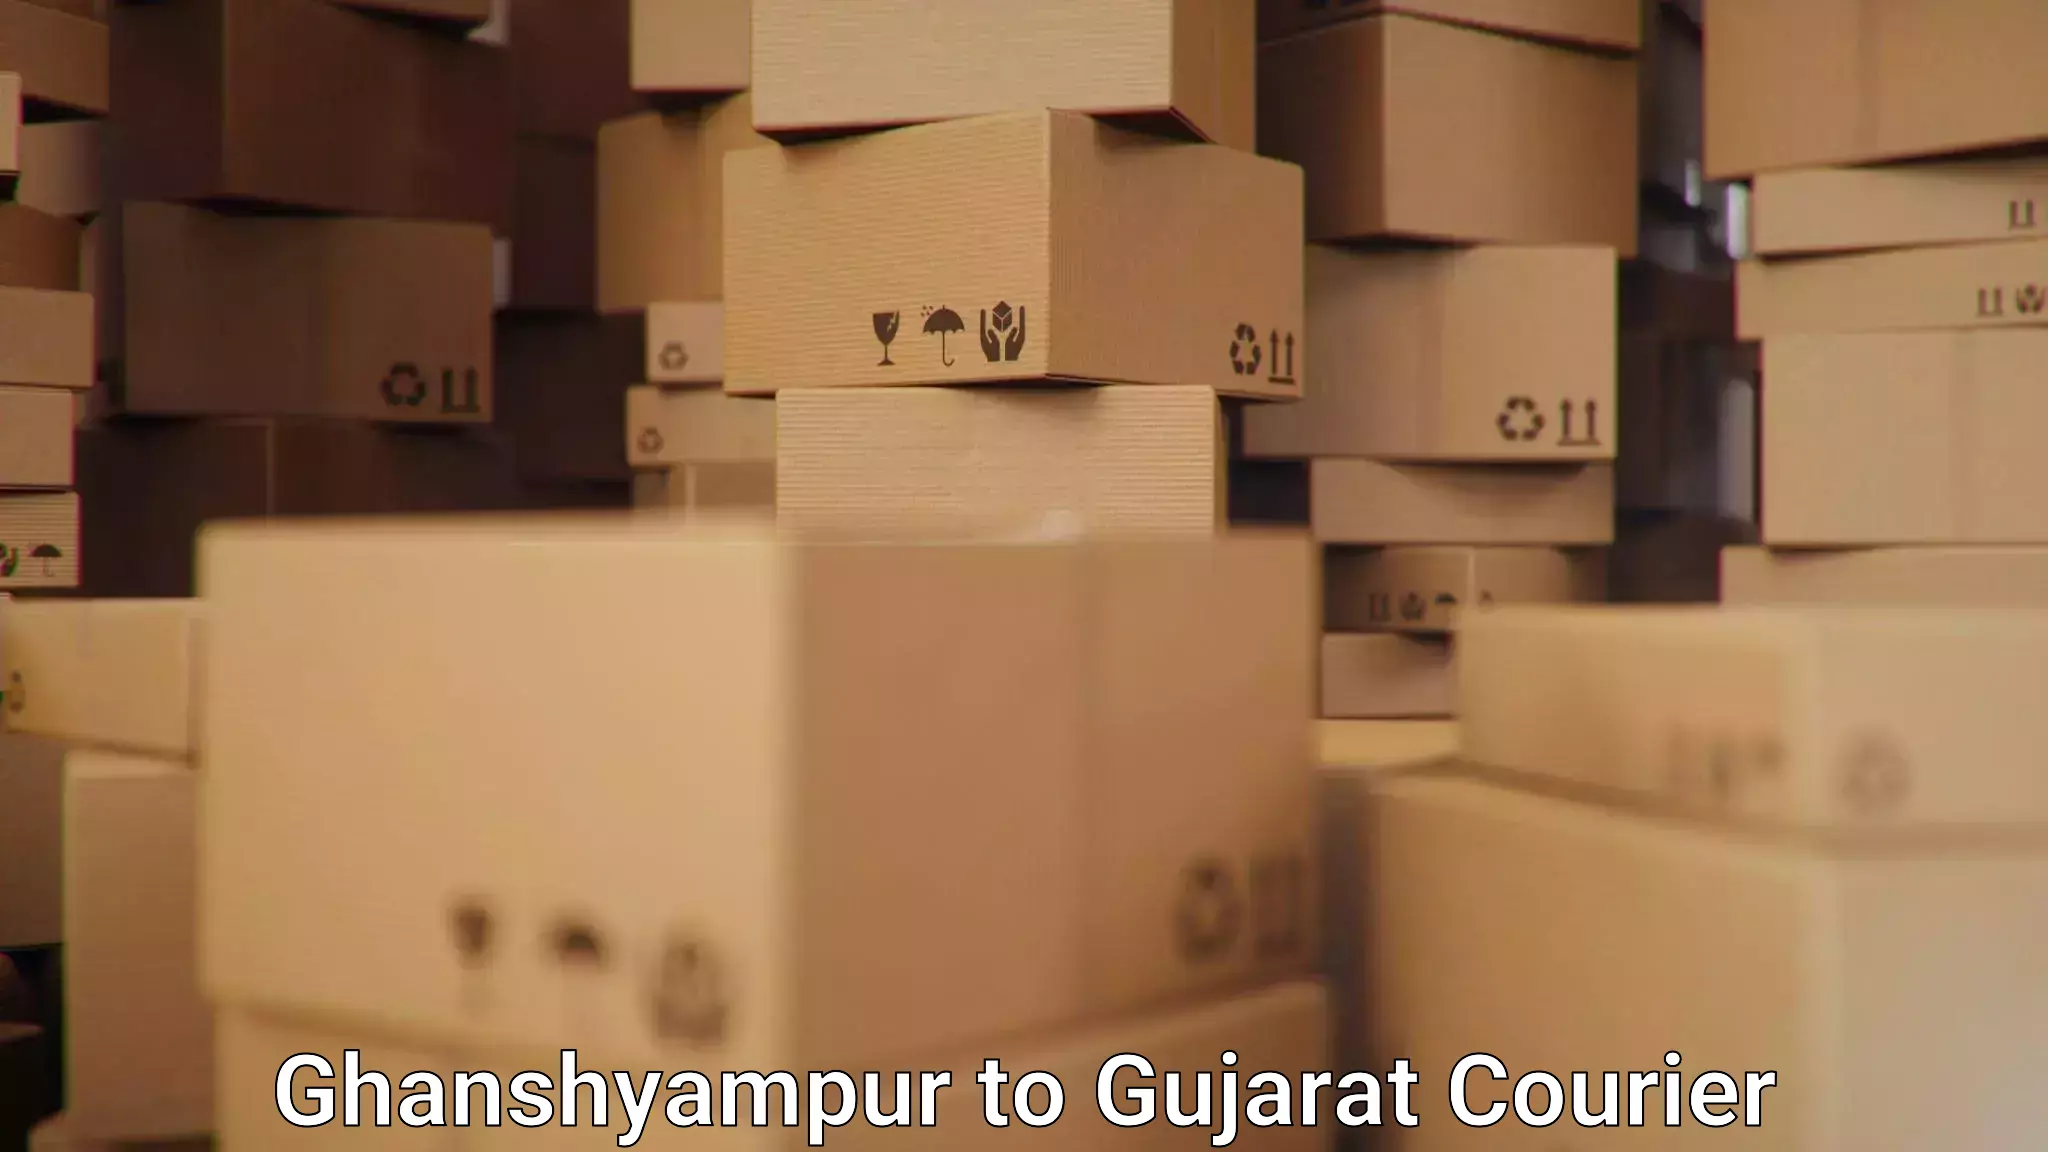 Courier service efficiency Ghanshyampur to Vapi